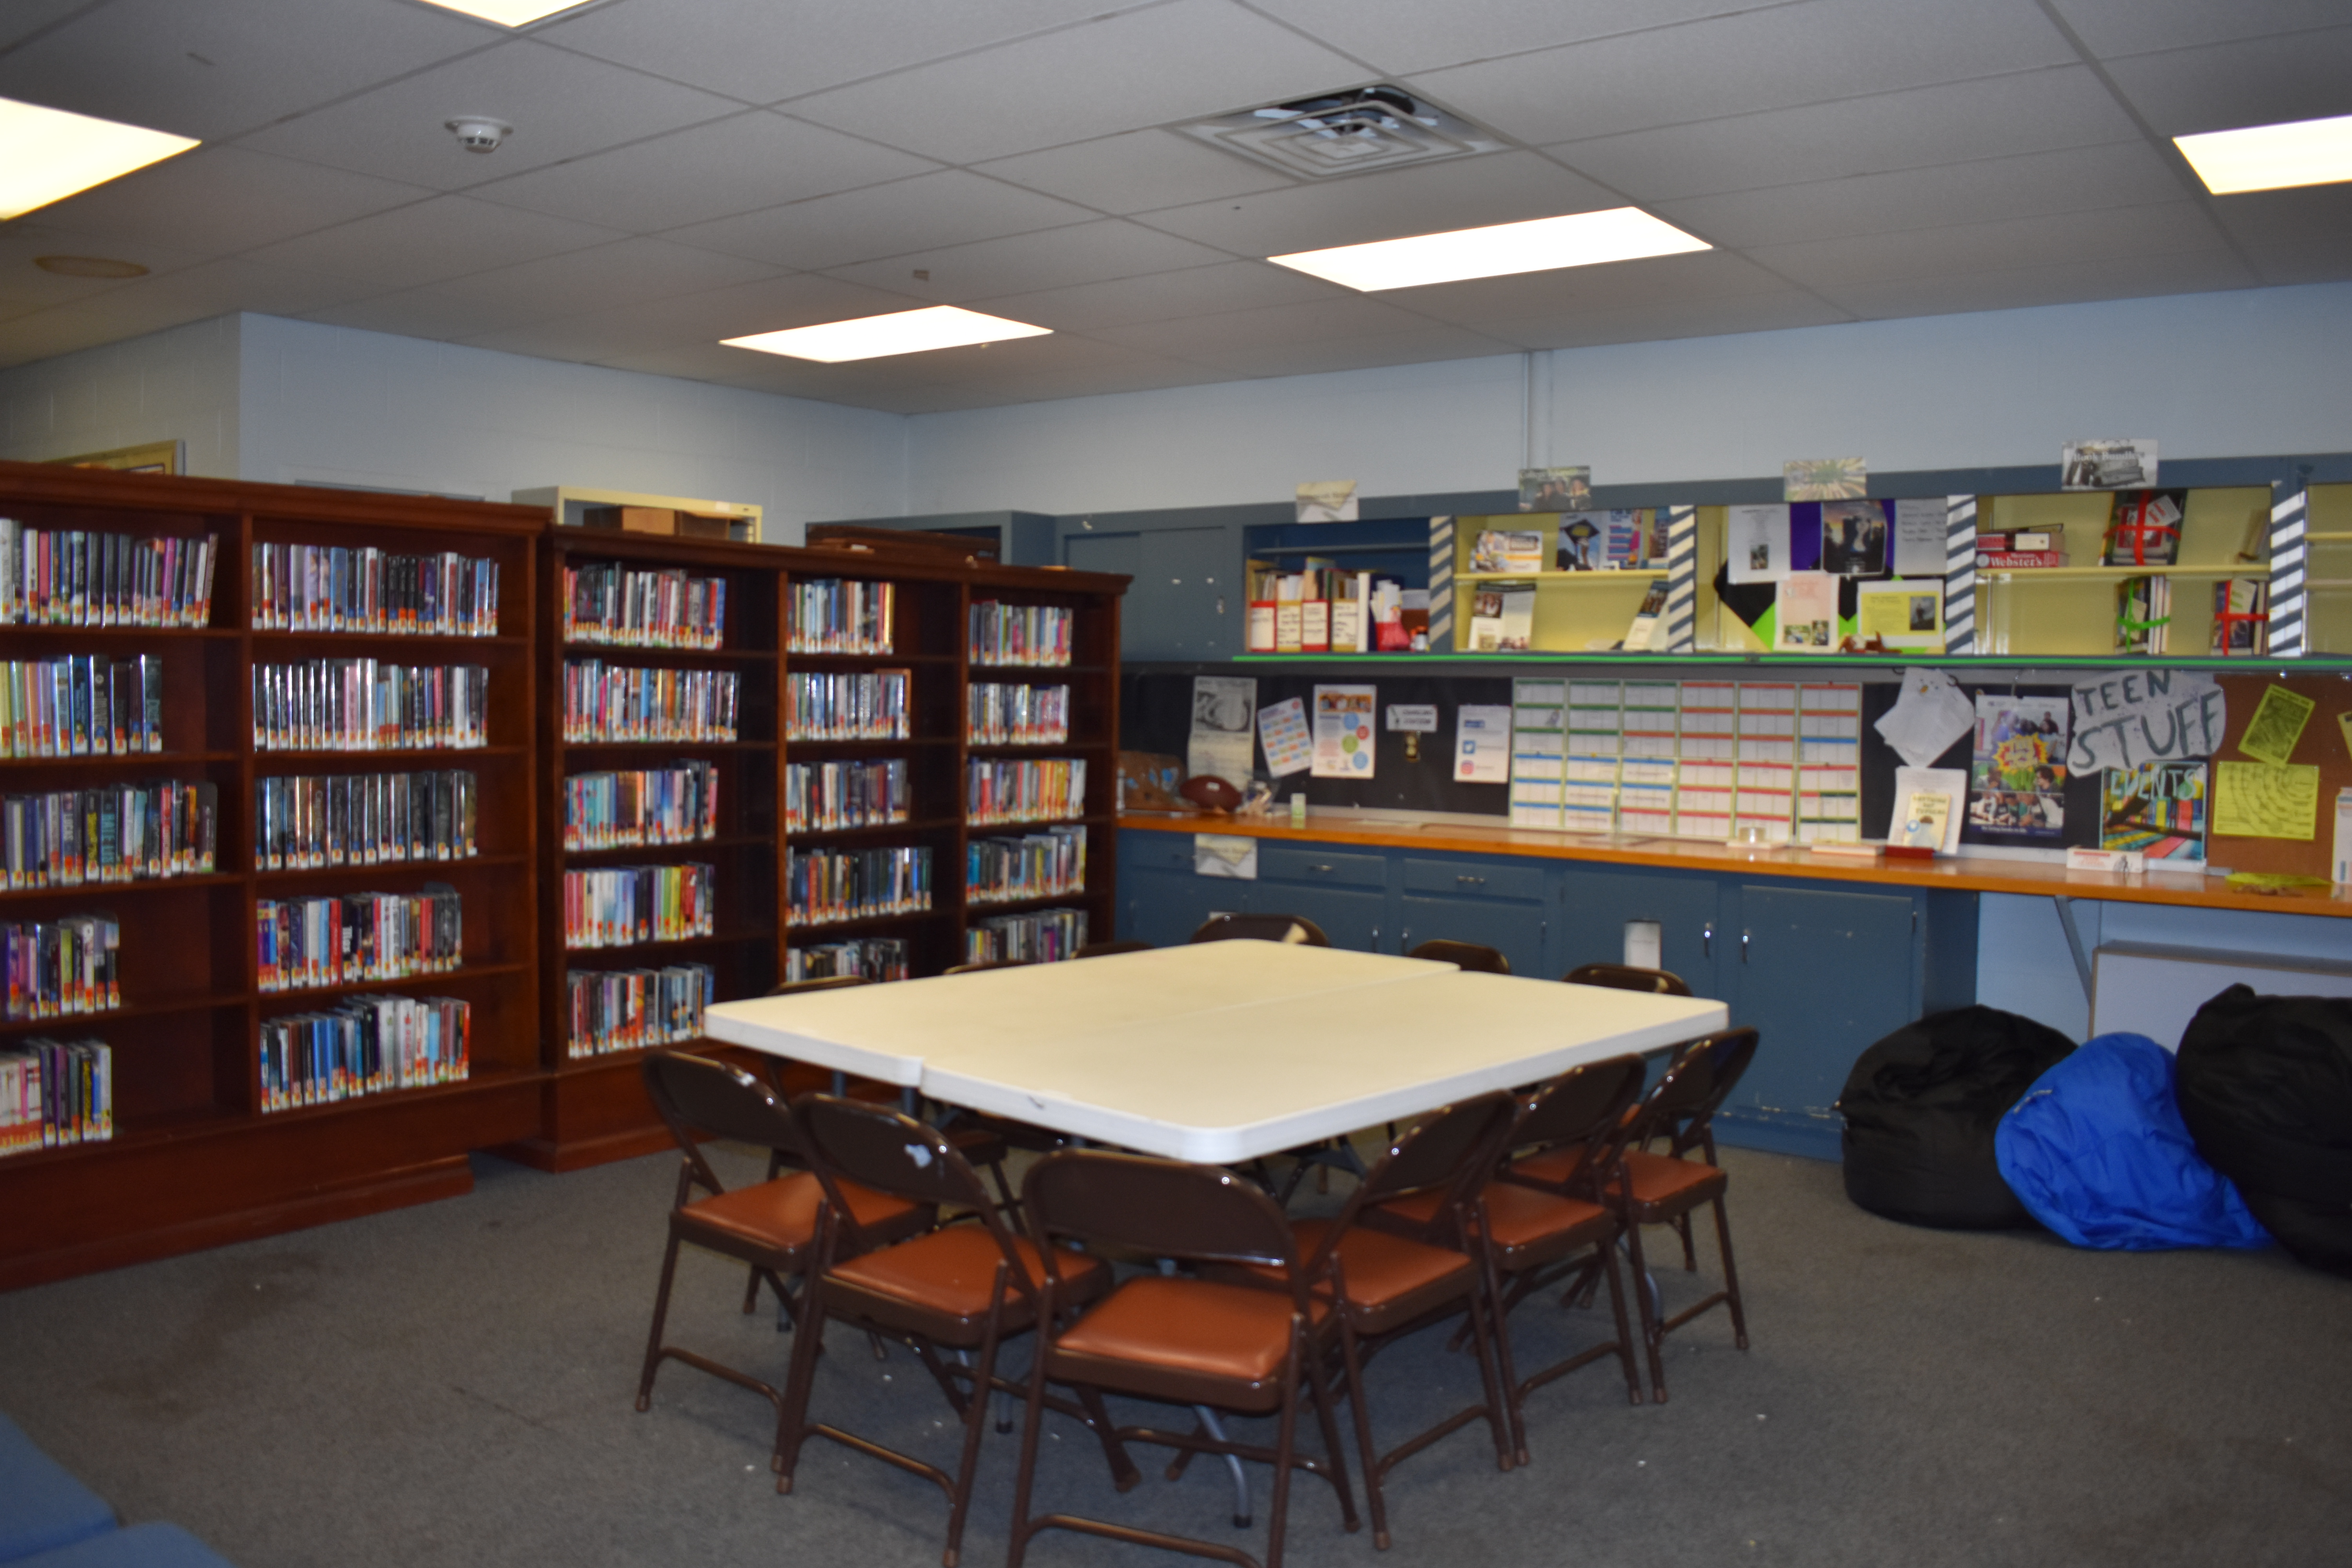 Photo of Teen Room with tables, chairs, bookshelves, etc.